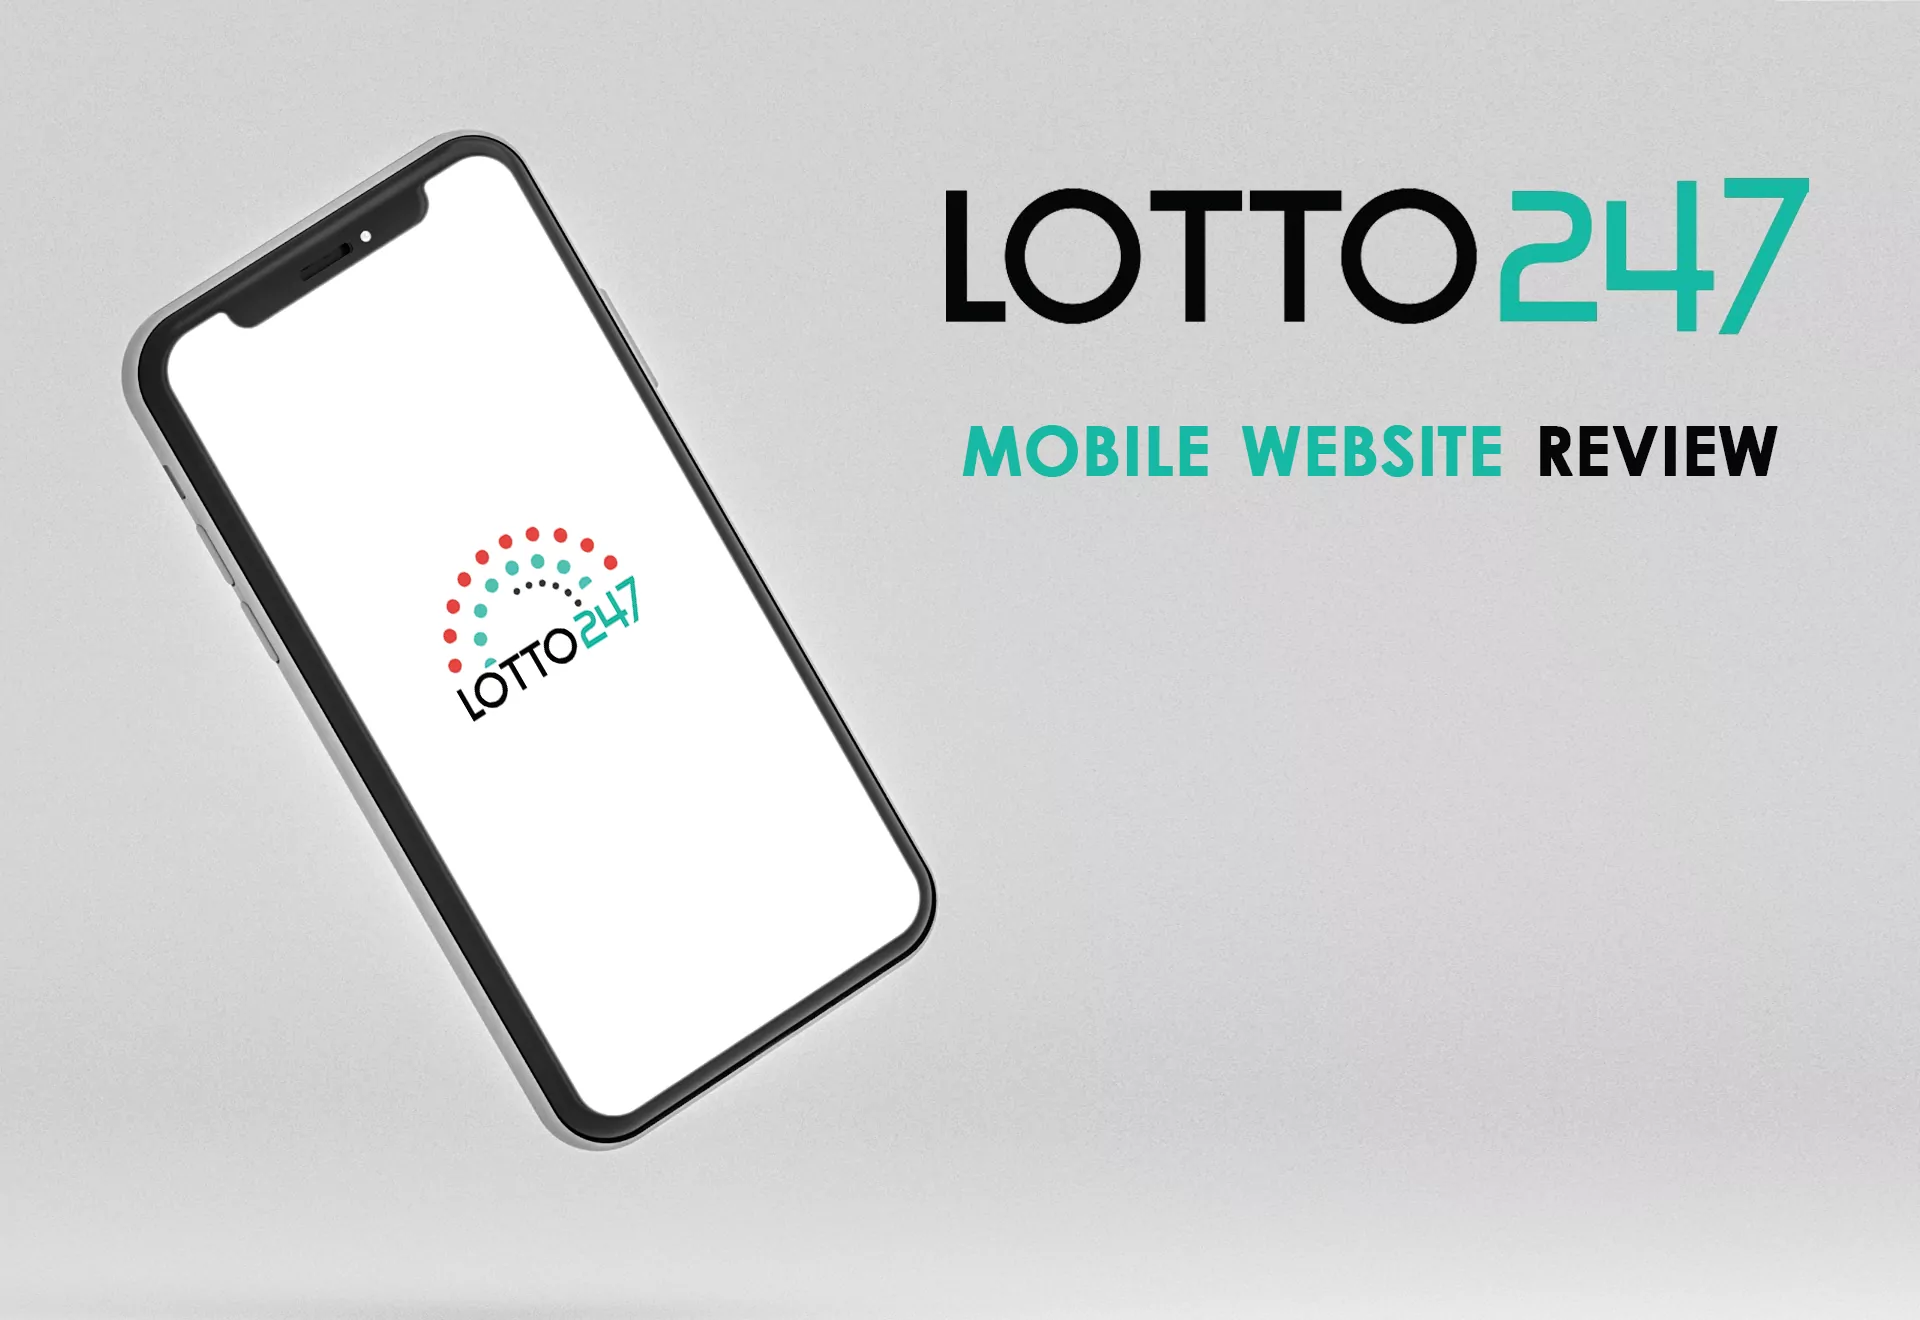 You can buy tickets at the mobile site of Lotto247 as well.